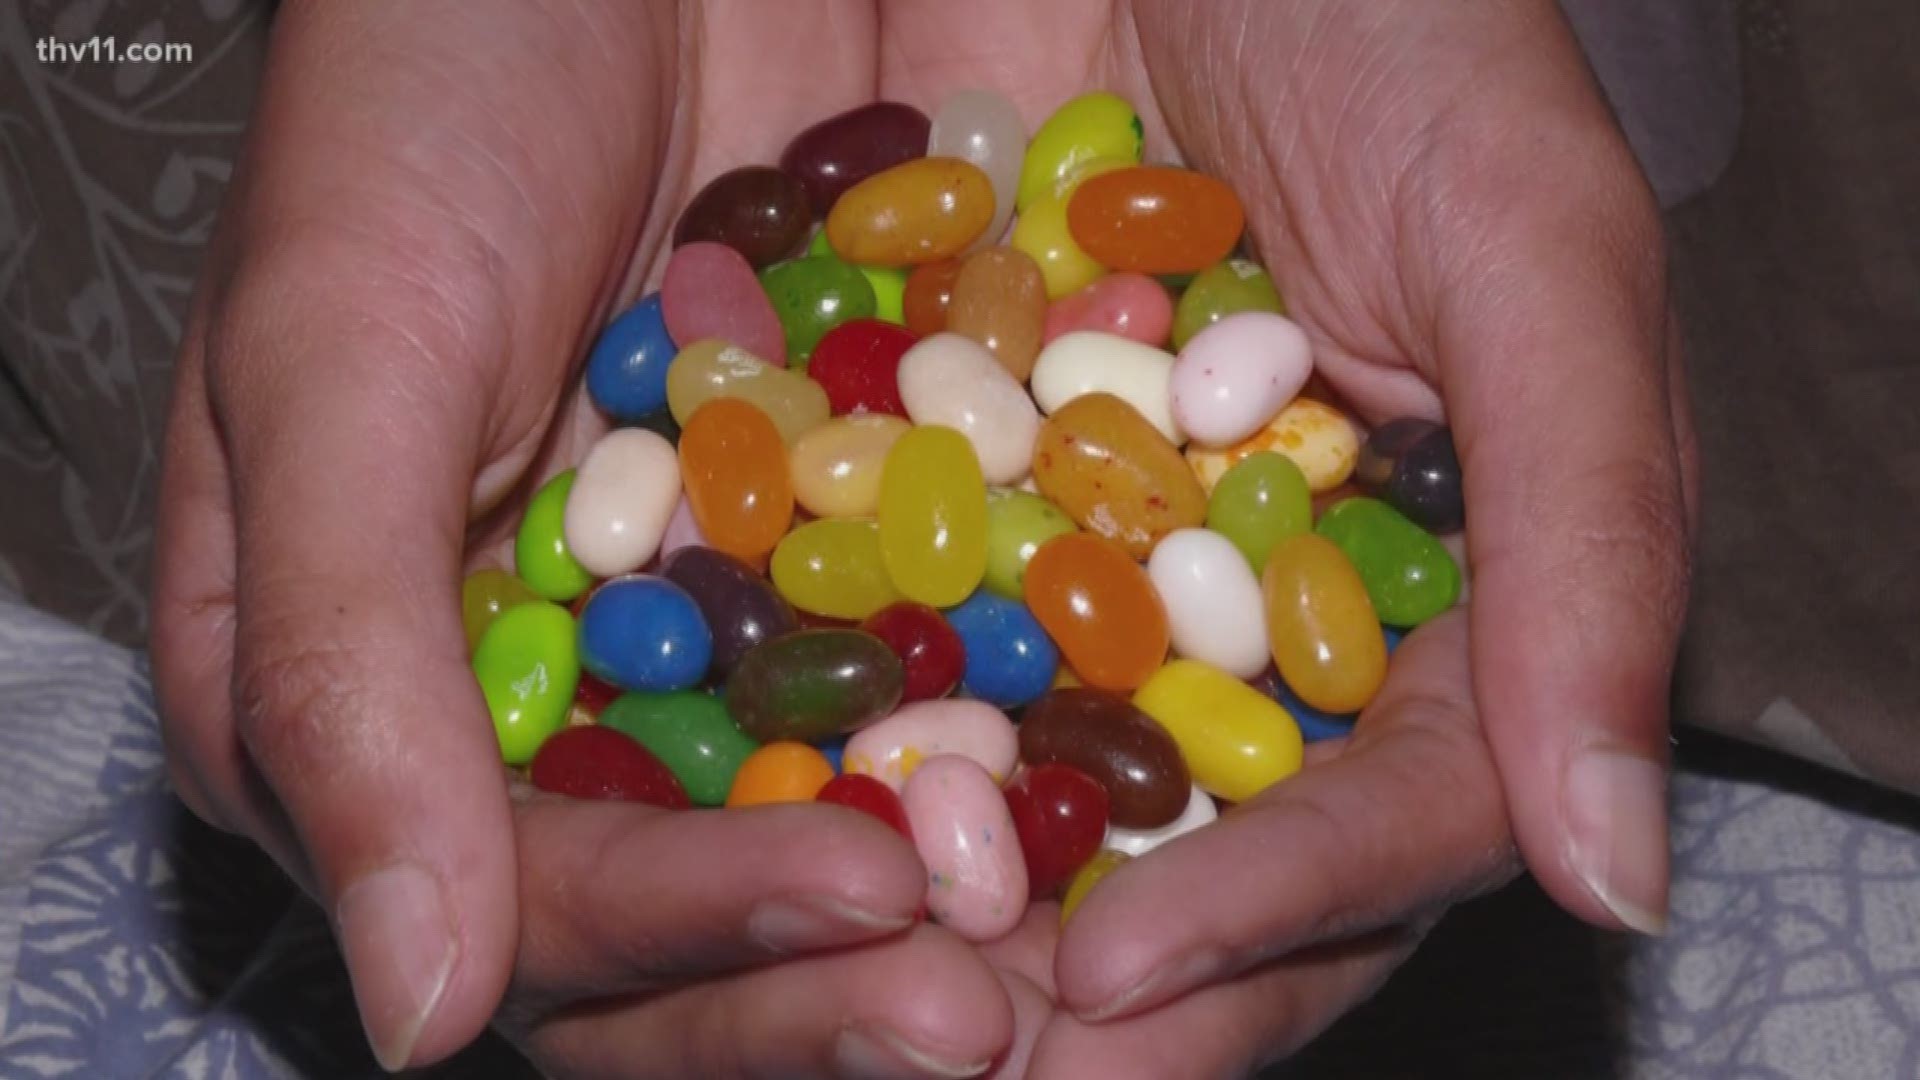 Erika Ferrando gets tongue-tied with Jelly Belly news.